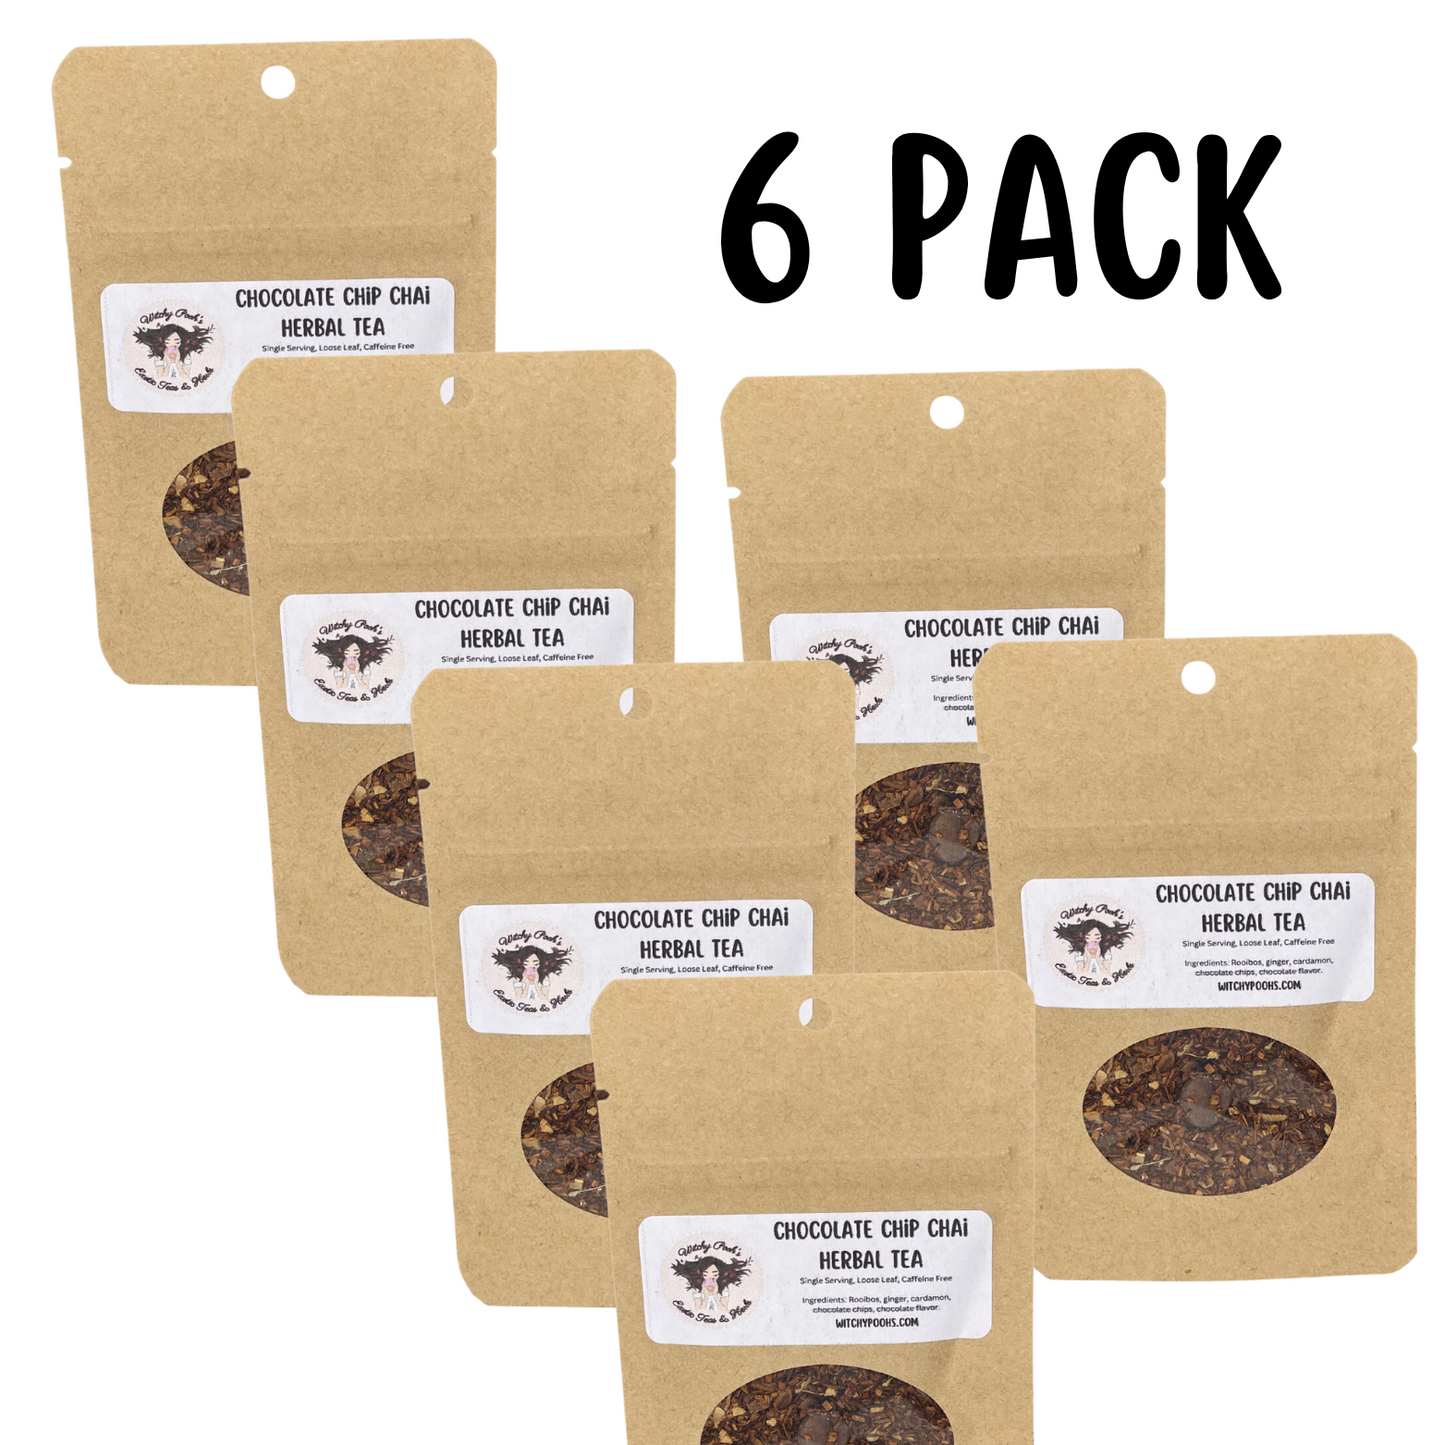 Witchy Pooh's Chocolate Chip Chai Loose Leaf Rooibos Herbal Tea with Real Chocolate Chips!